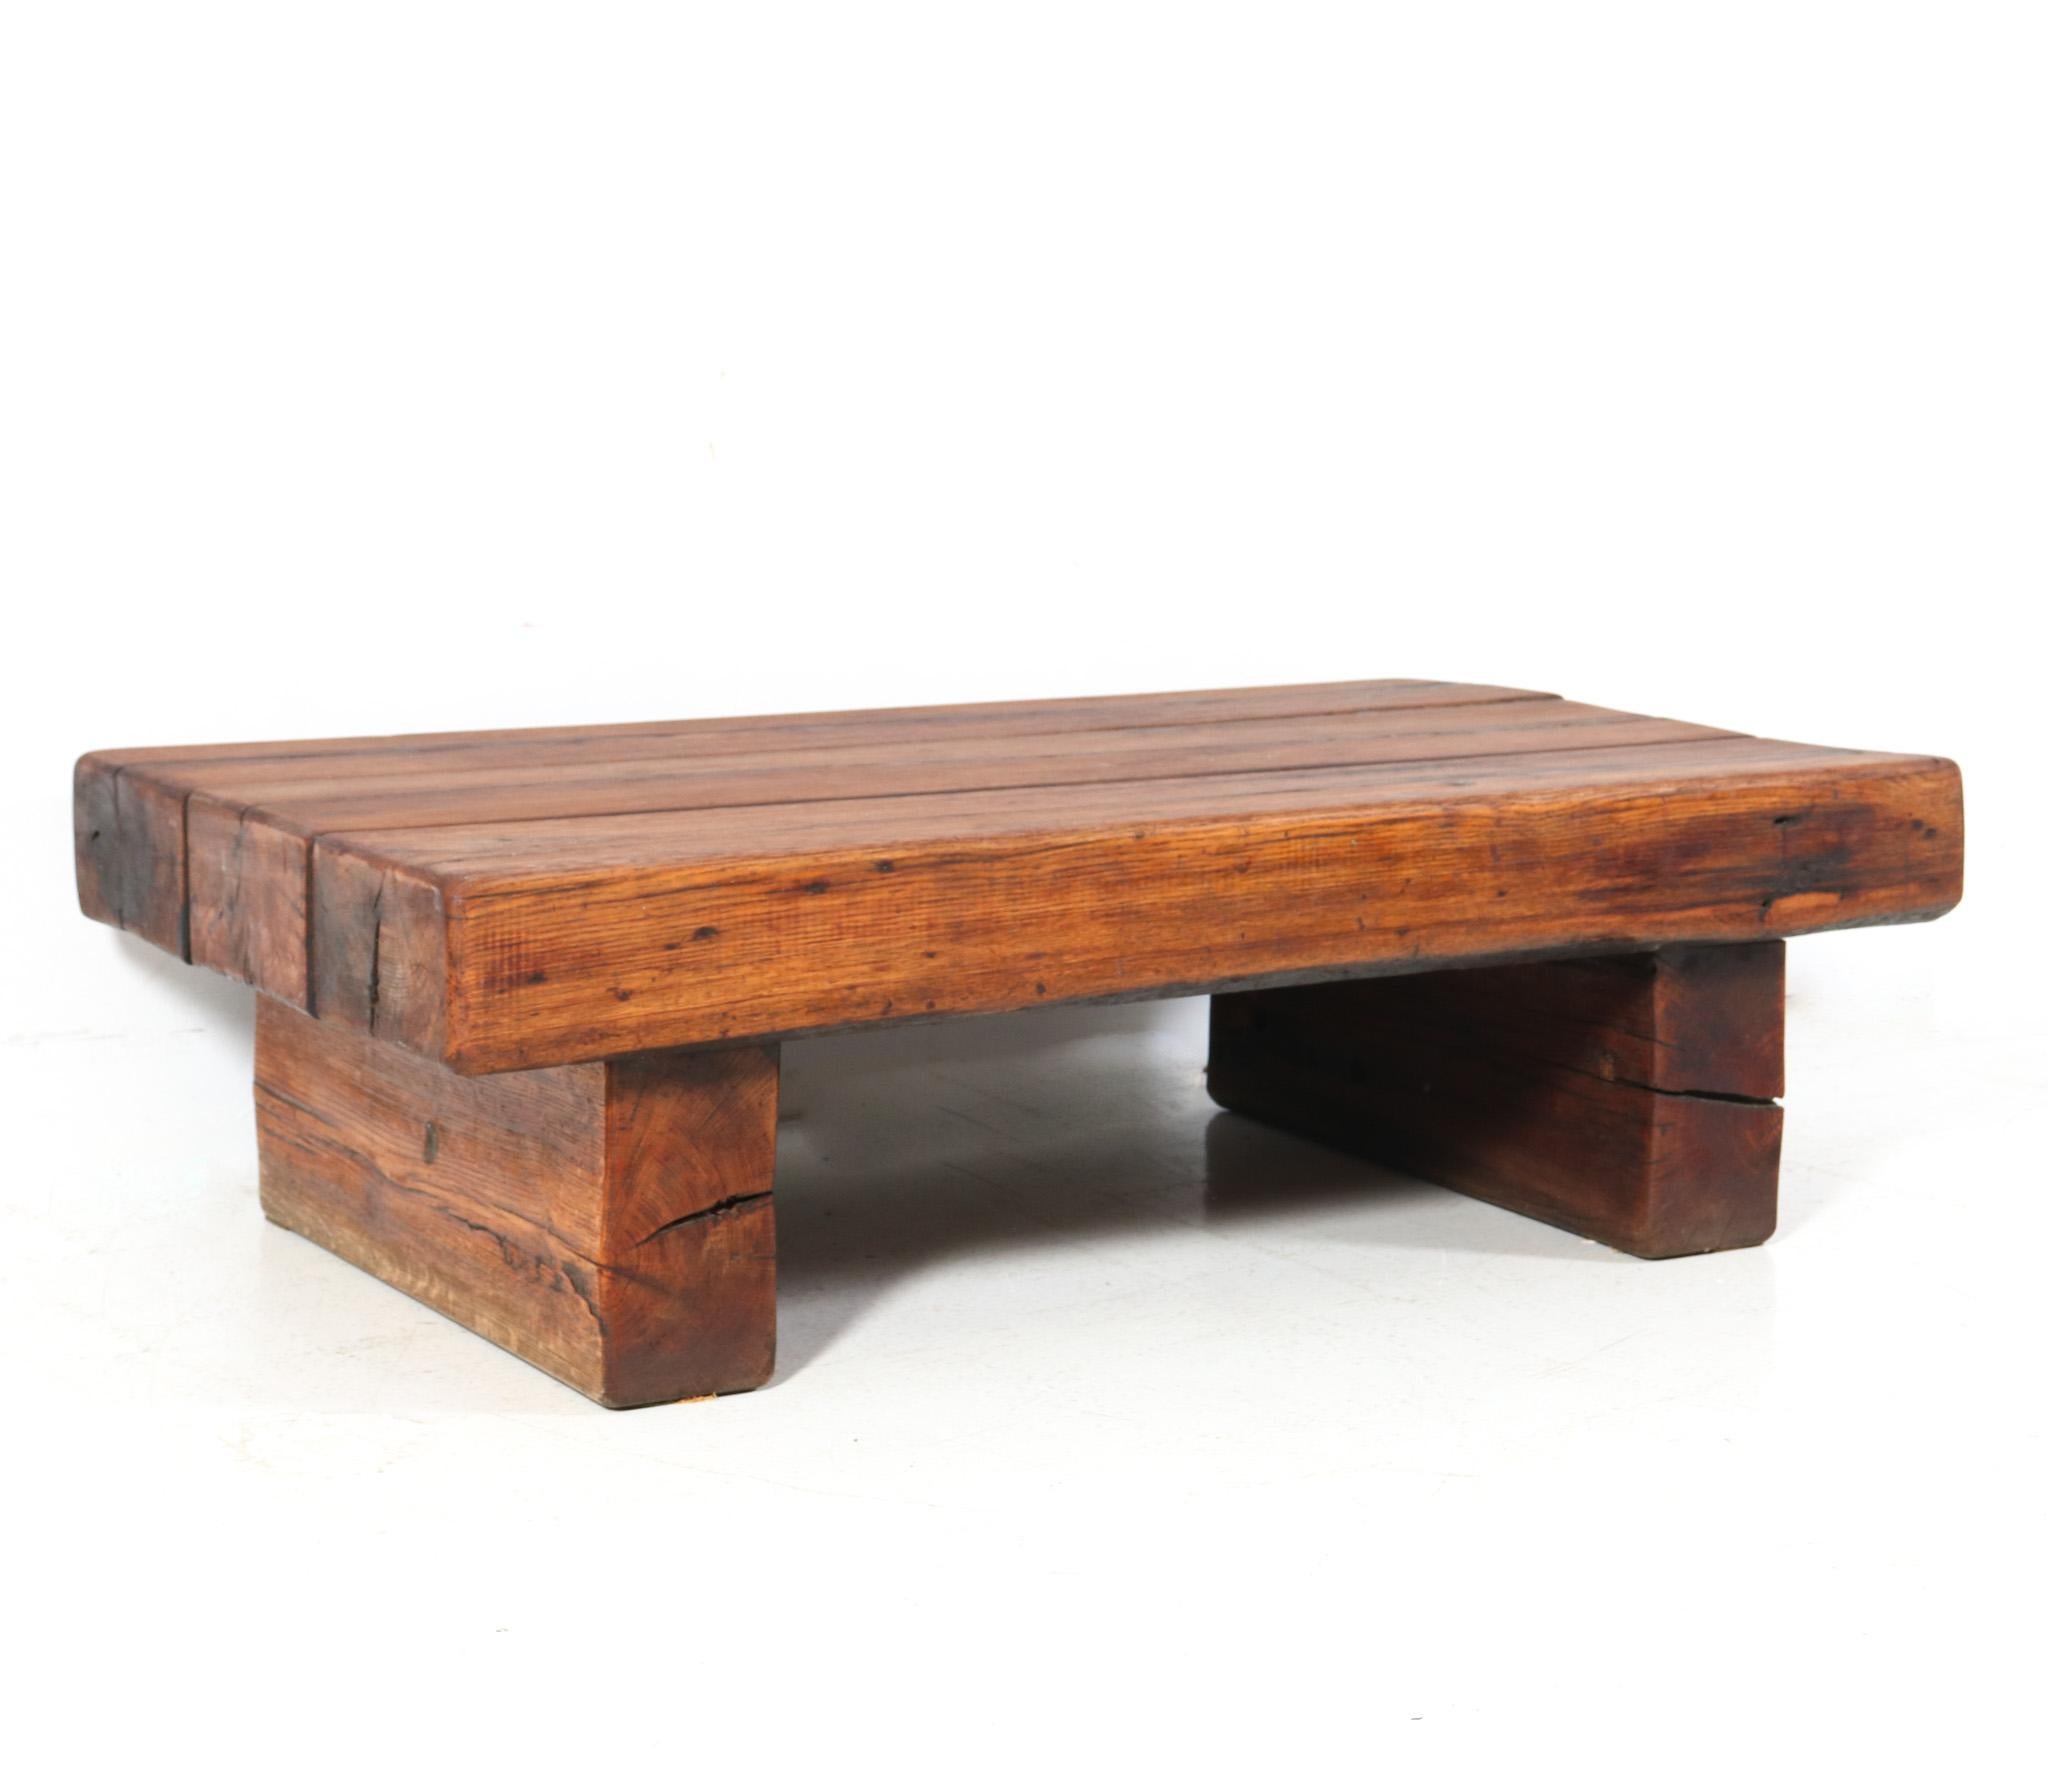 Stunning Mid-Century Modern Brutalist Rustic coffee table.
Striking French design from the 1960s.
Solid oak base with original solid oak top.
This wonderful Mid-Century Modern Brutalist Rustic coffee table is in very good condition with minor wear